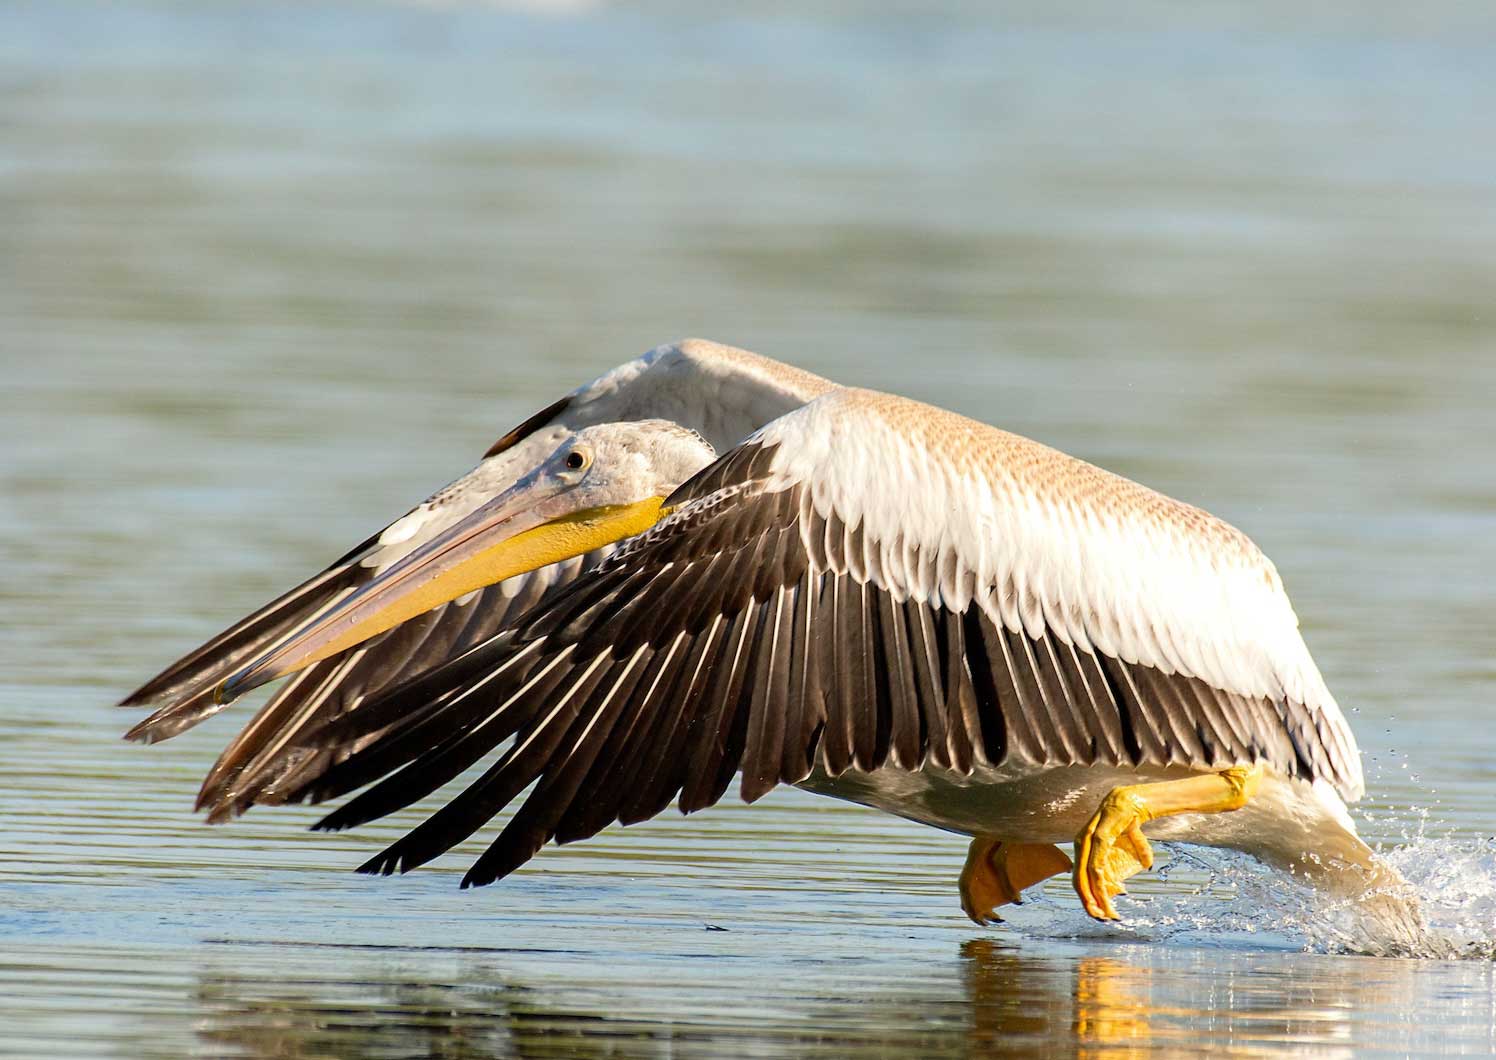 A pelican in flight with its wings extended forward just over the water's surface.